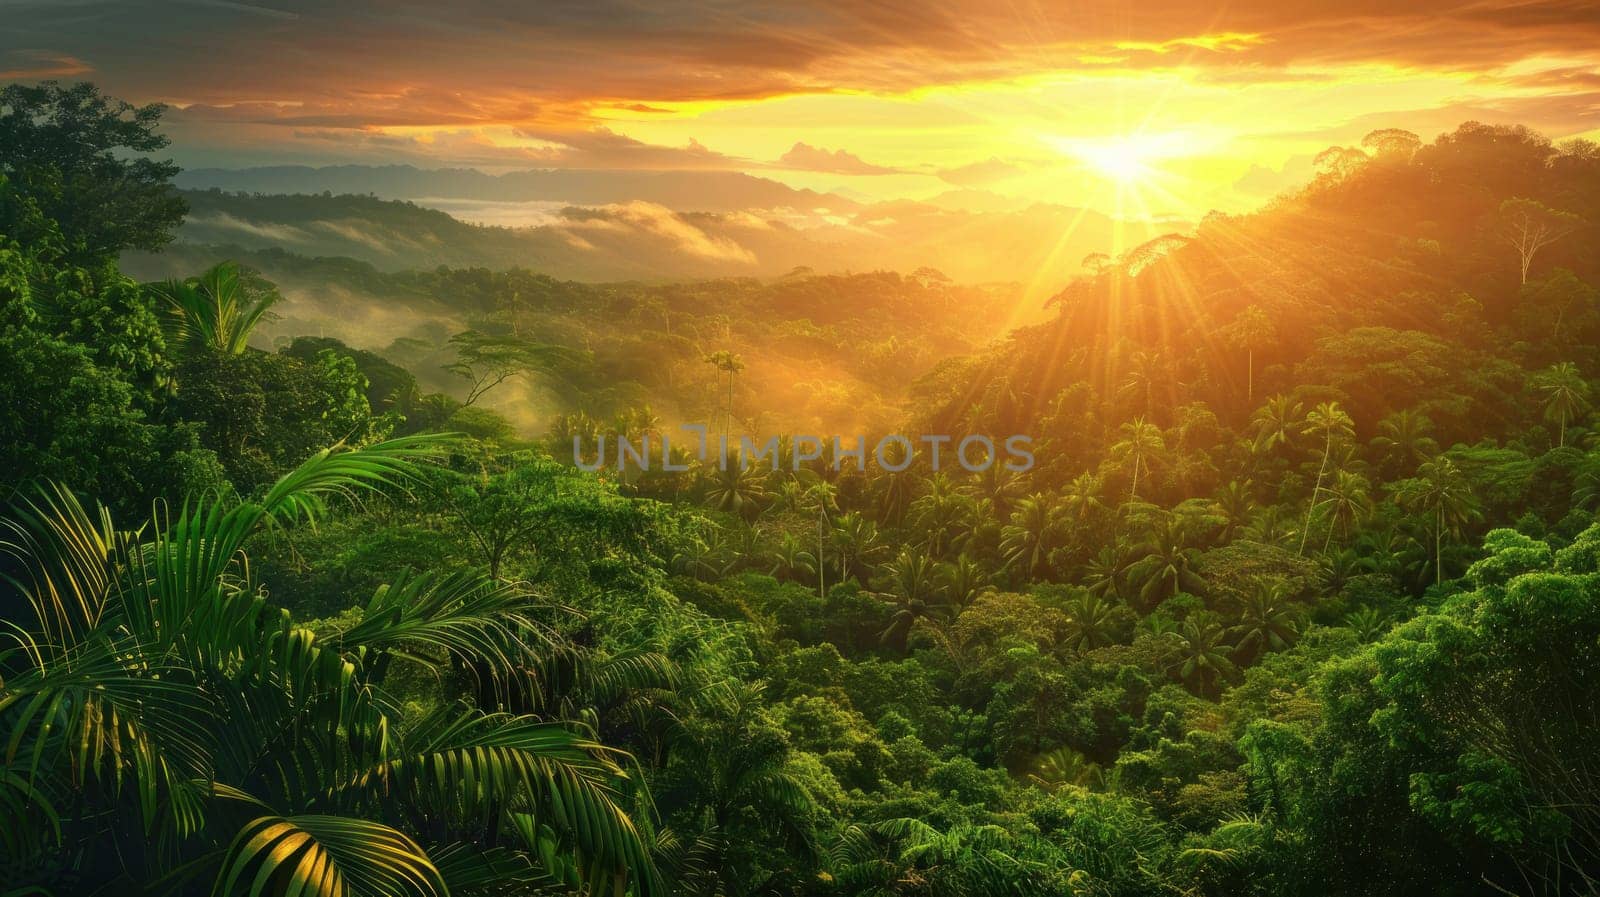 A mesmerizing sunset over a tropical rainforest, with golden sunlight filtering through lush green foliage and casting a warm glow over the tranquil landscape, capturing the magic and beauty of.